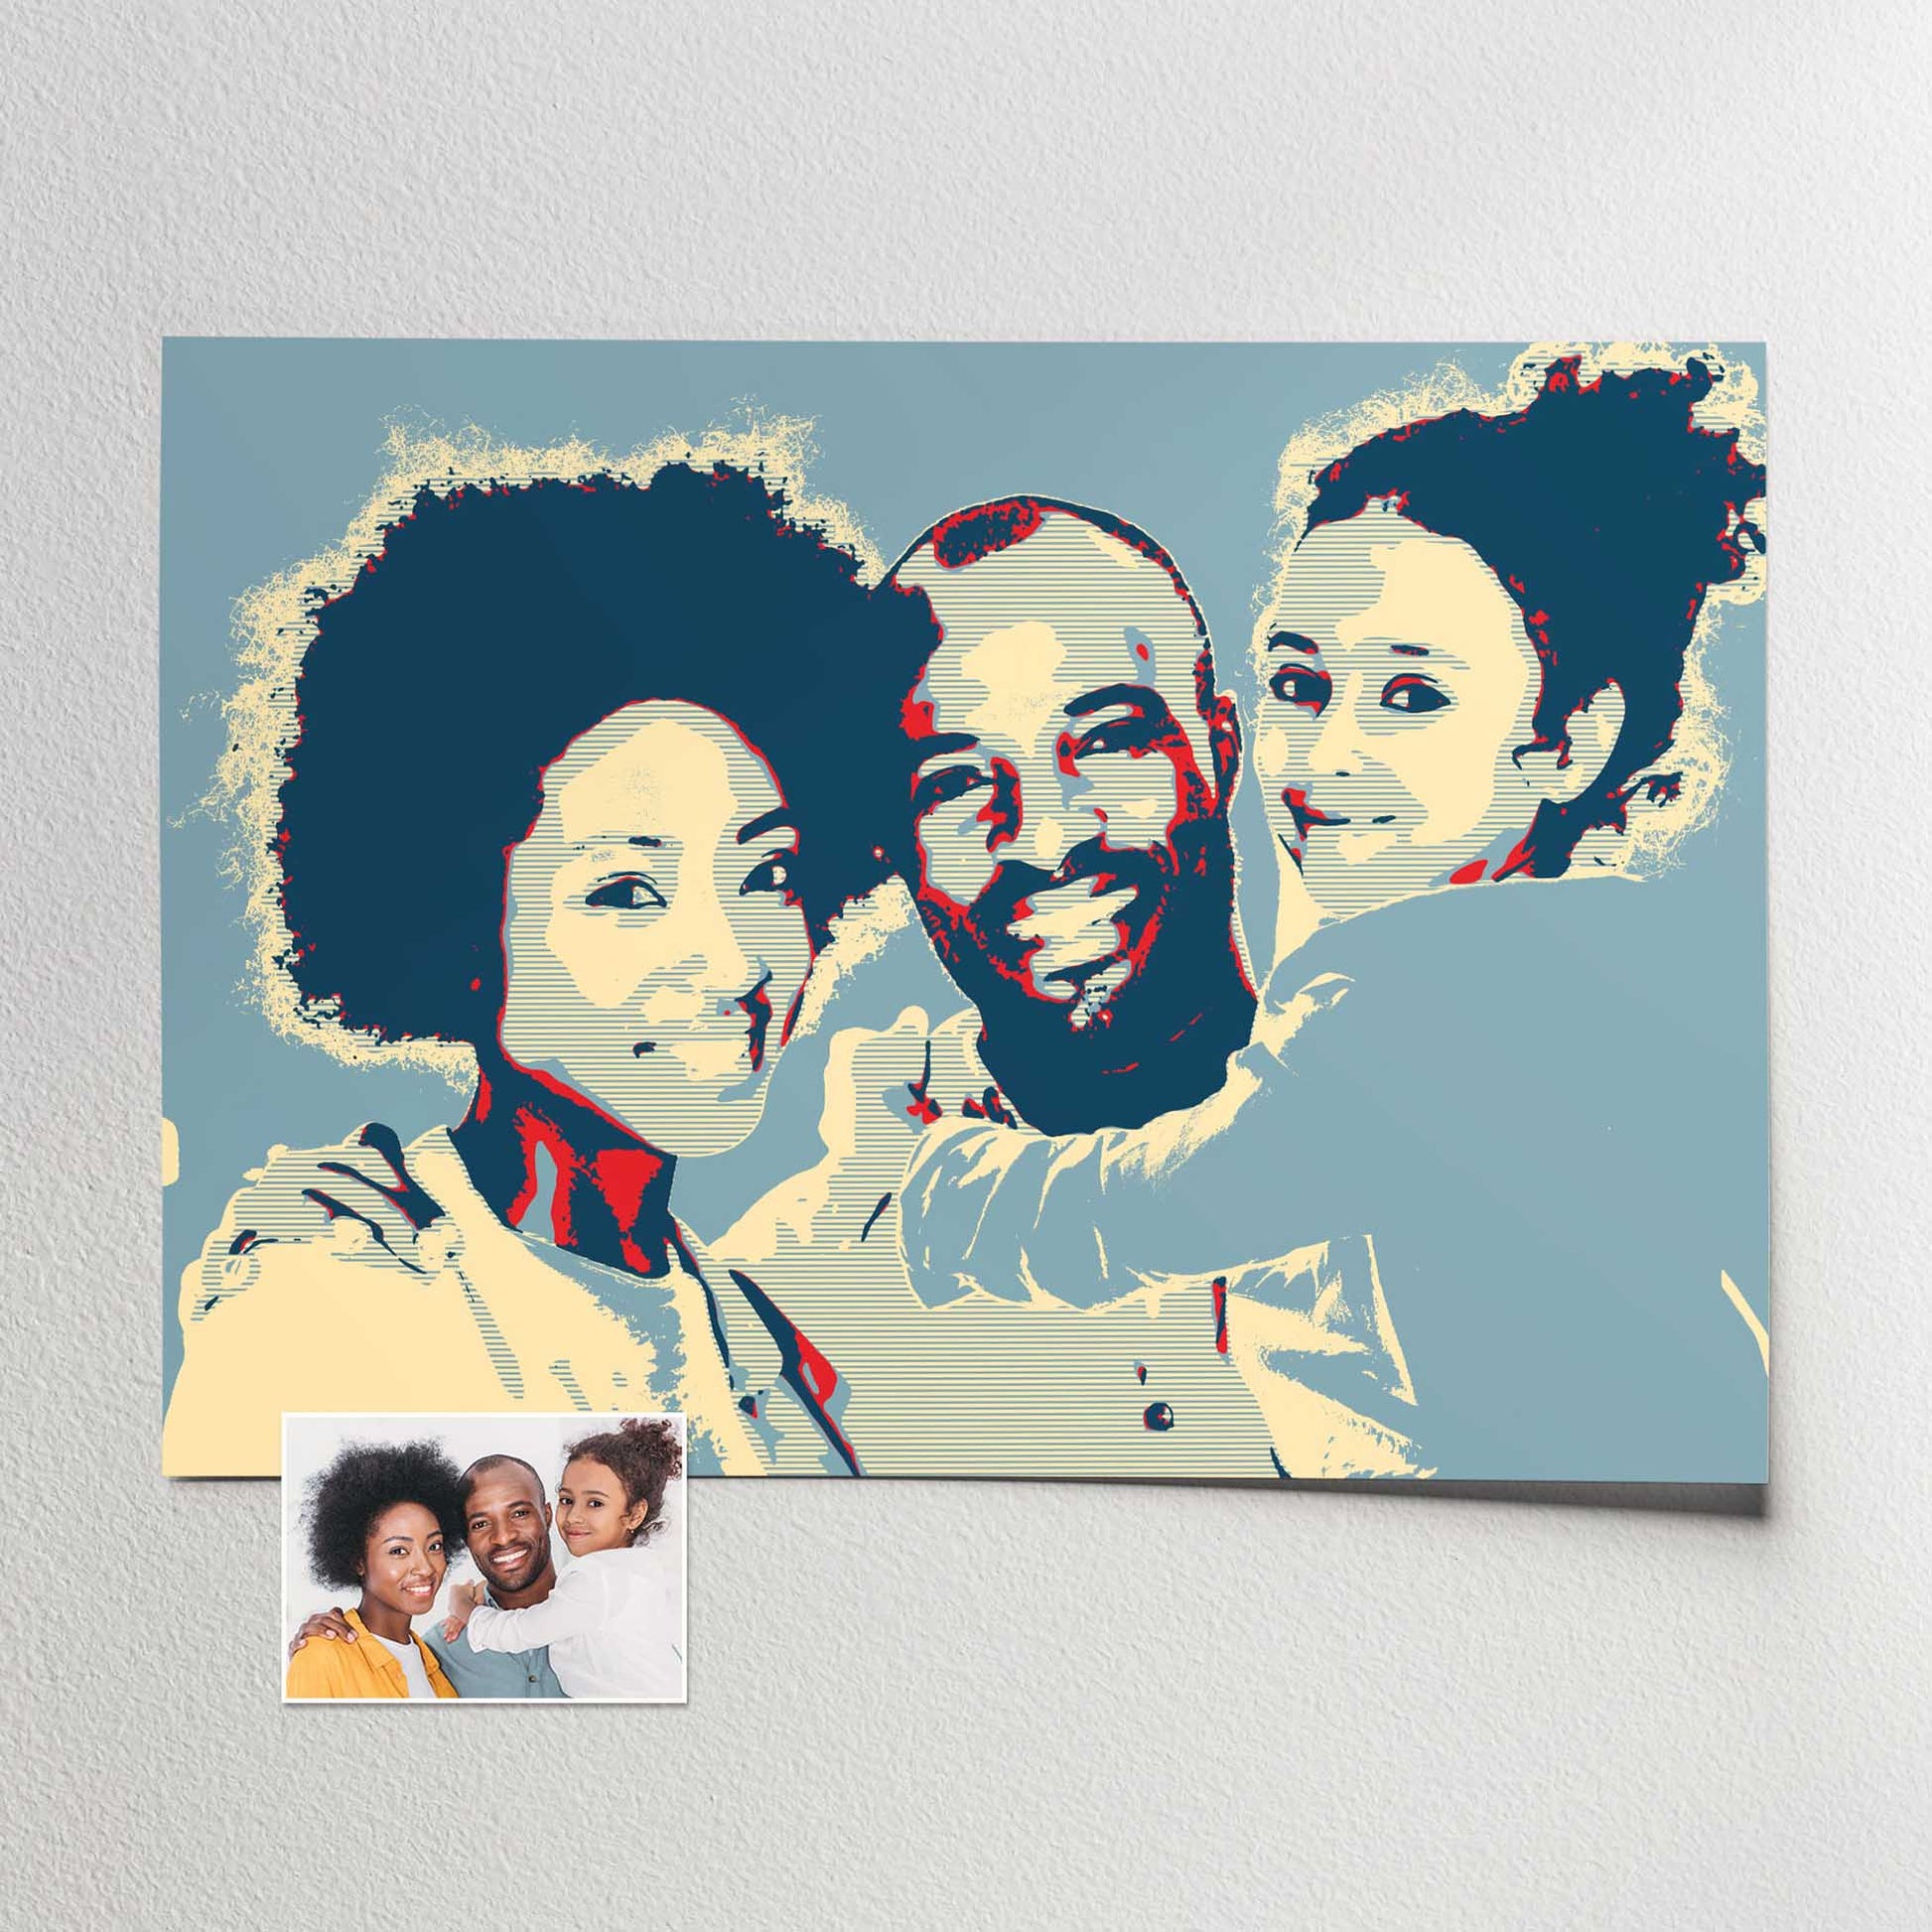 Transform your photo into an iconic Personalised Election Poster Print, created in a pop art style. The vibrant red, blue, and beige hues add a touch of sharpness and edginess to the design. With its legendary and bold appeal